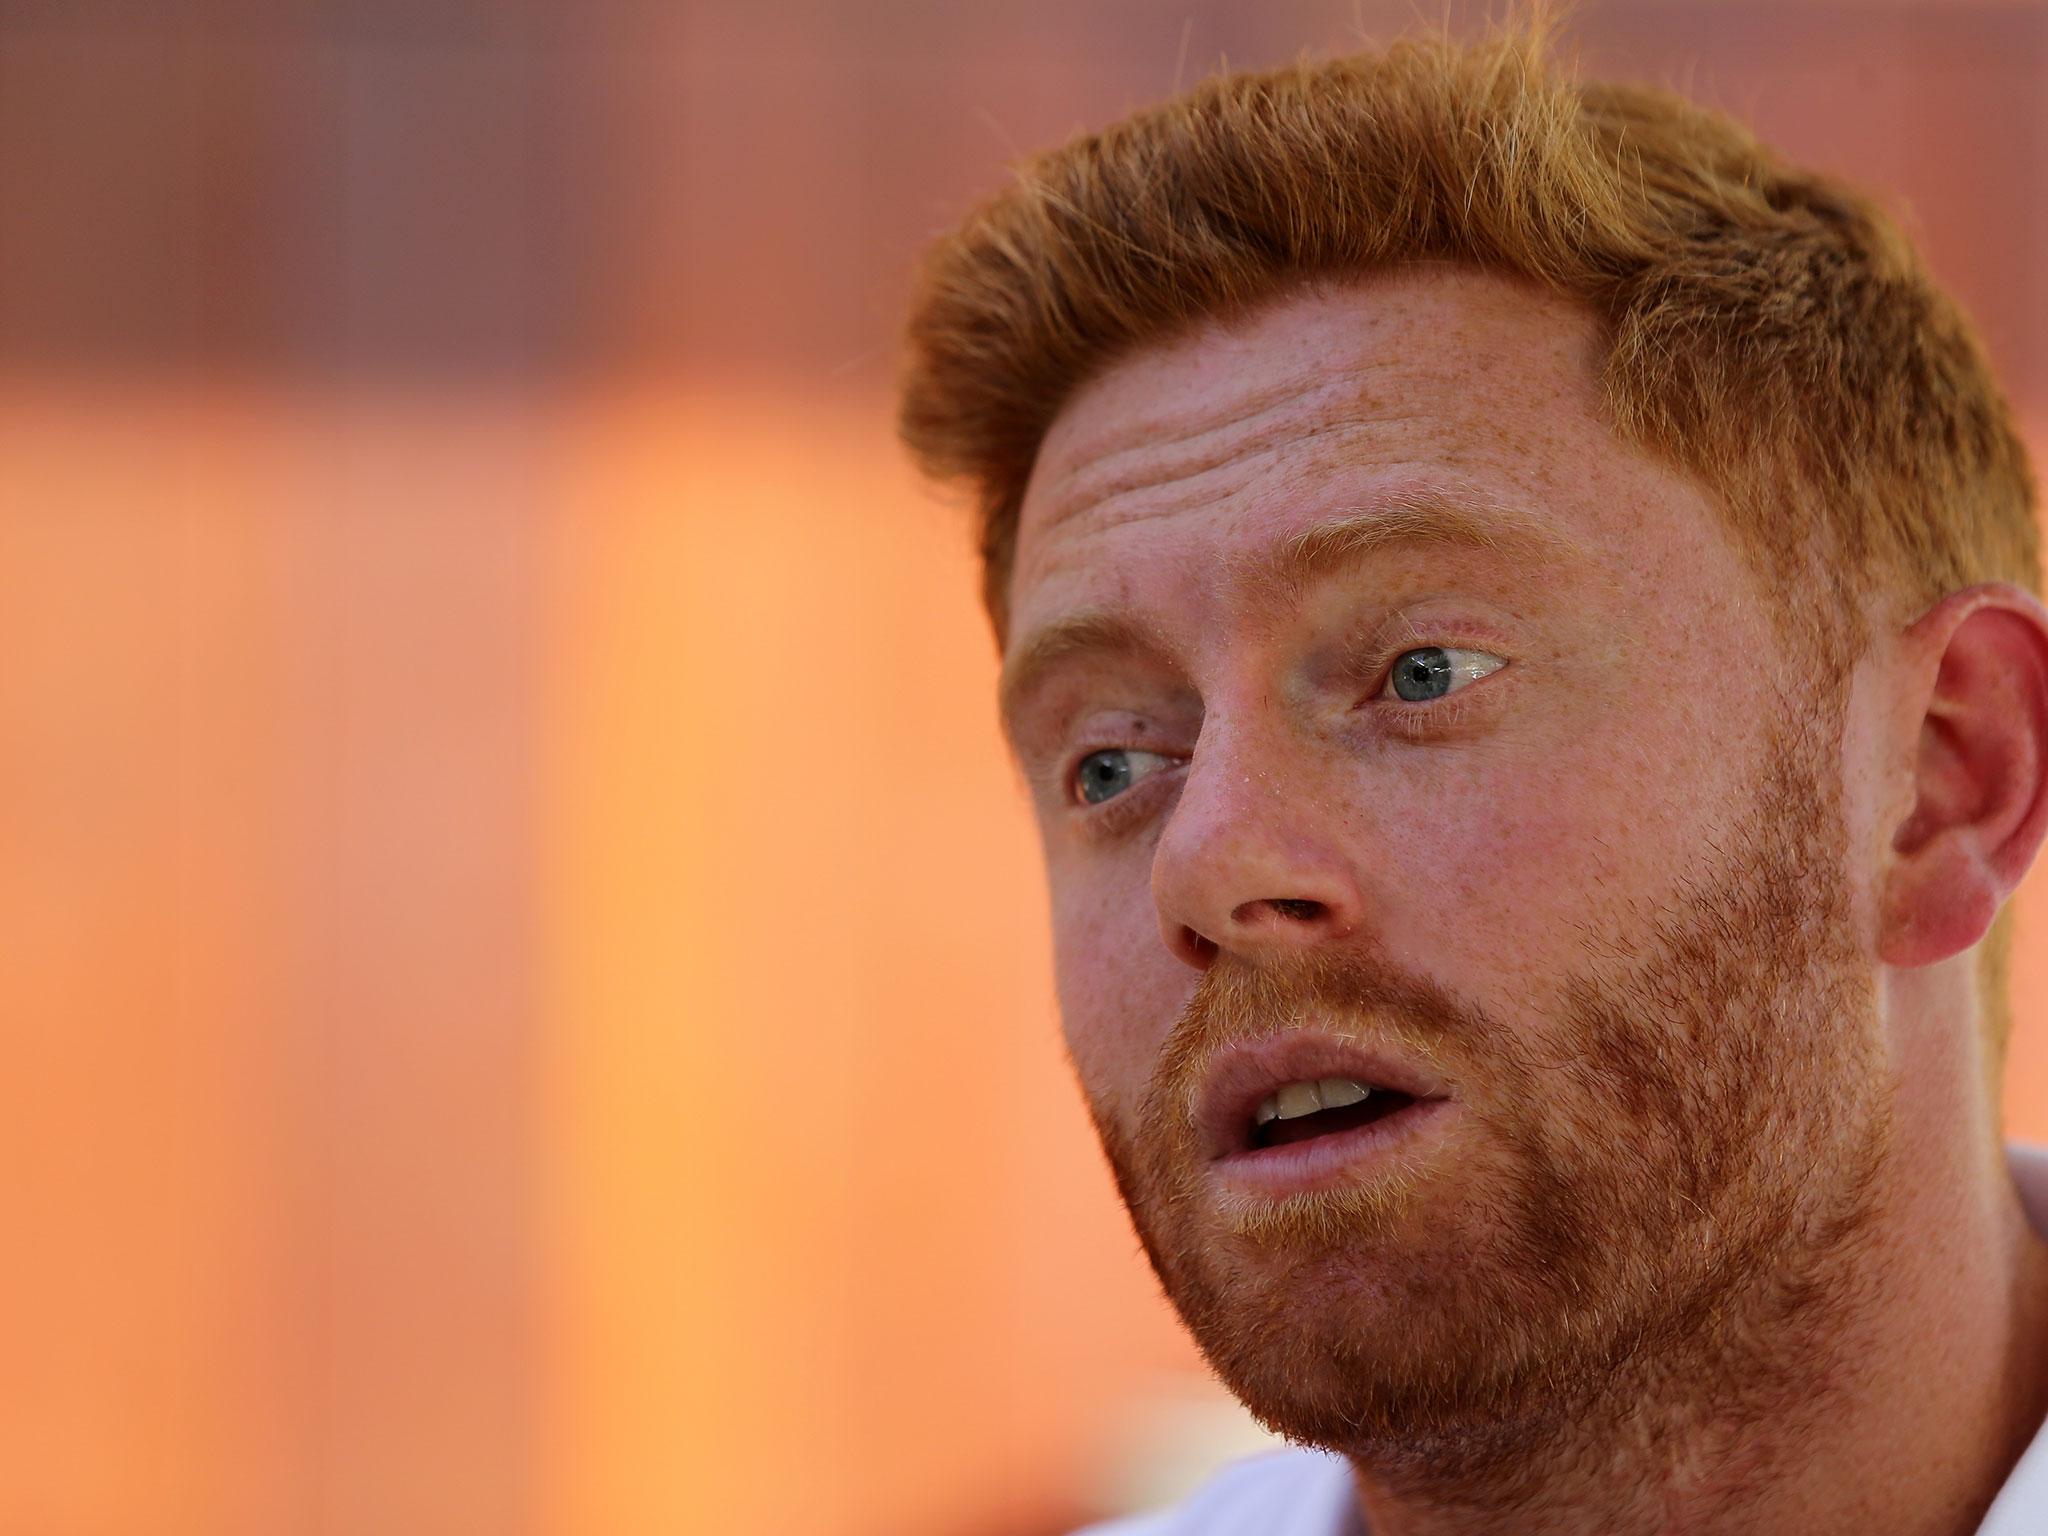 Jonny Bairstow knows his England team need results to regain the public's faith